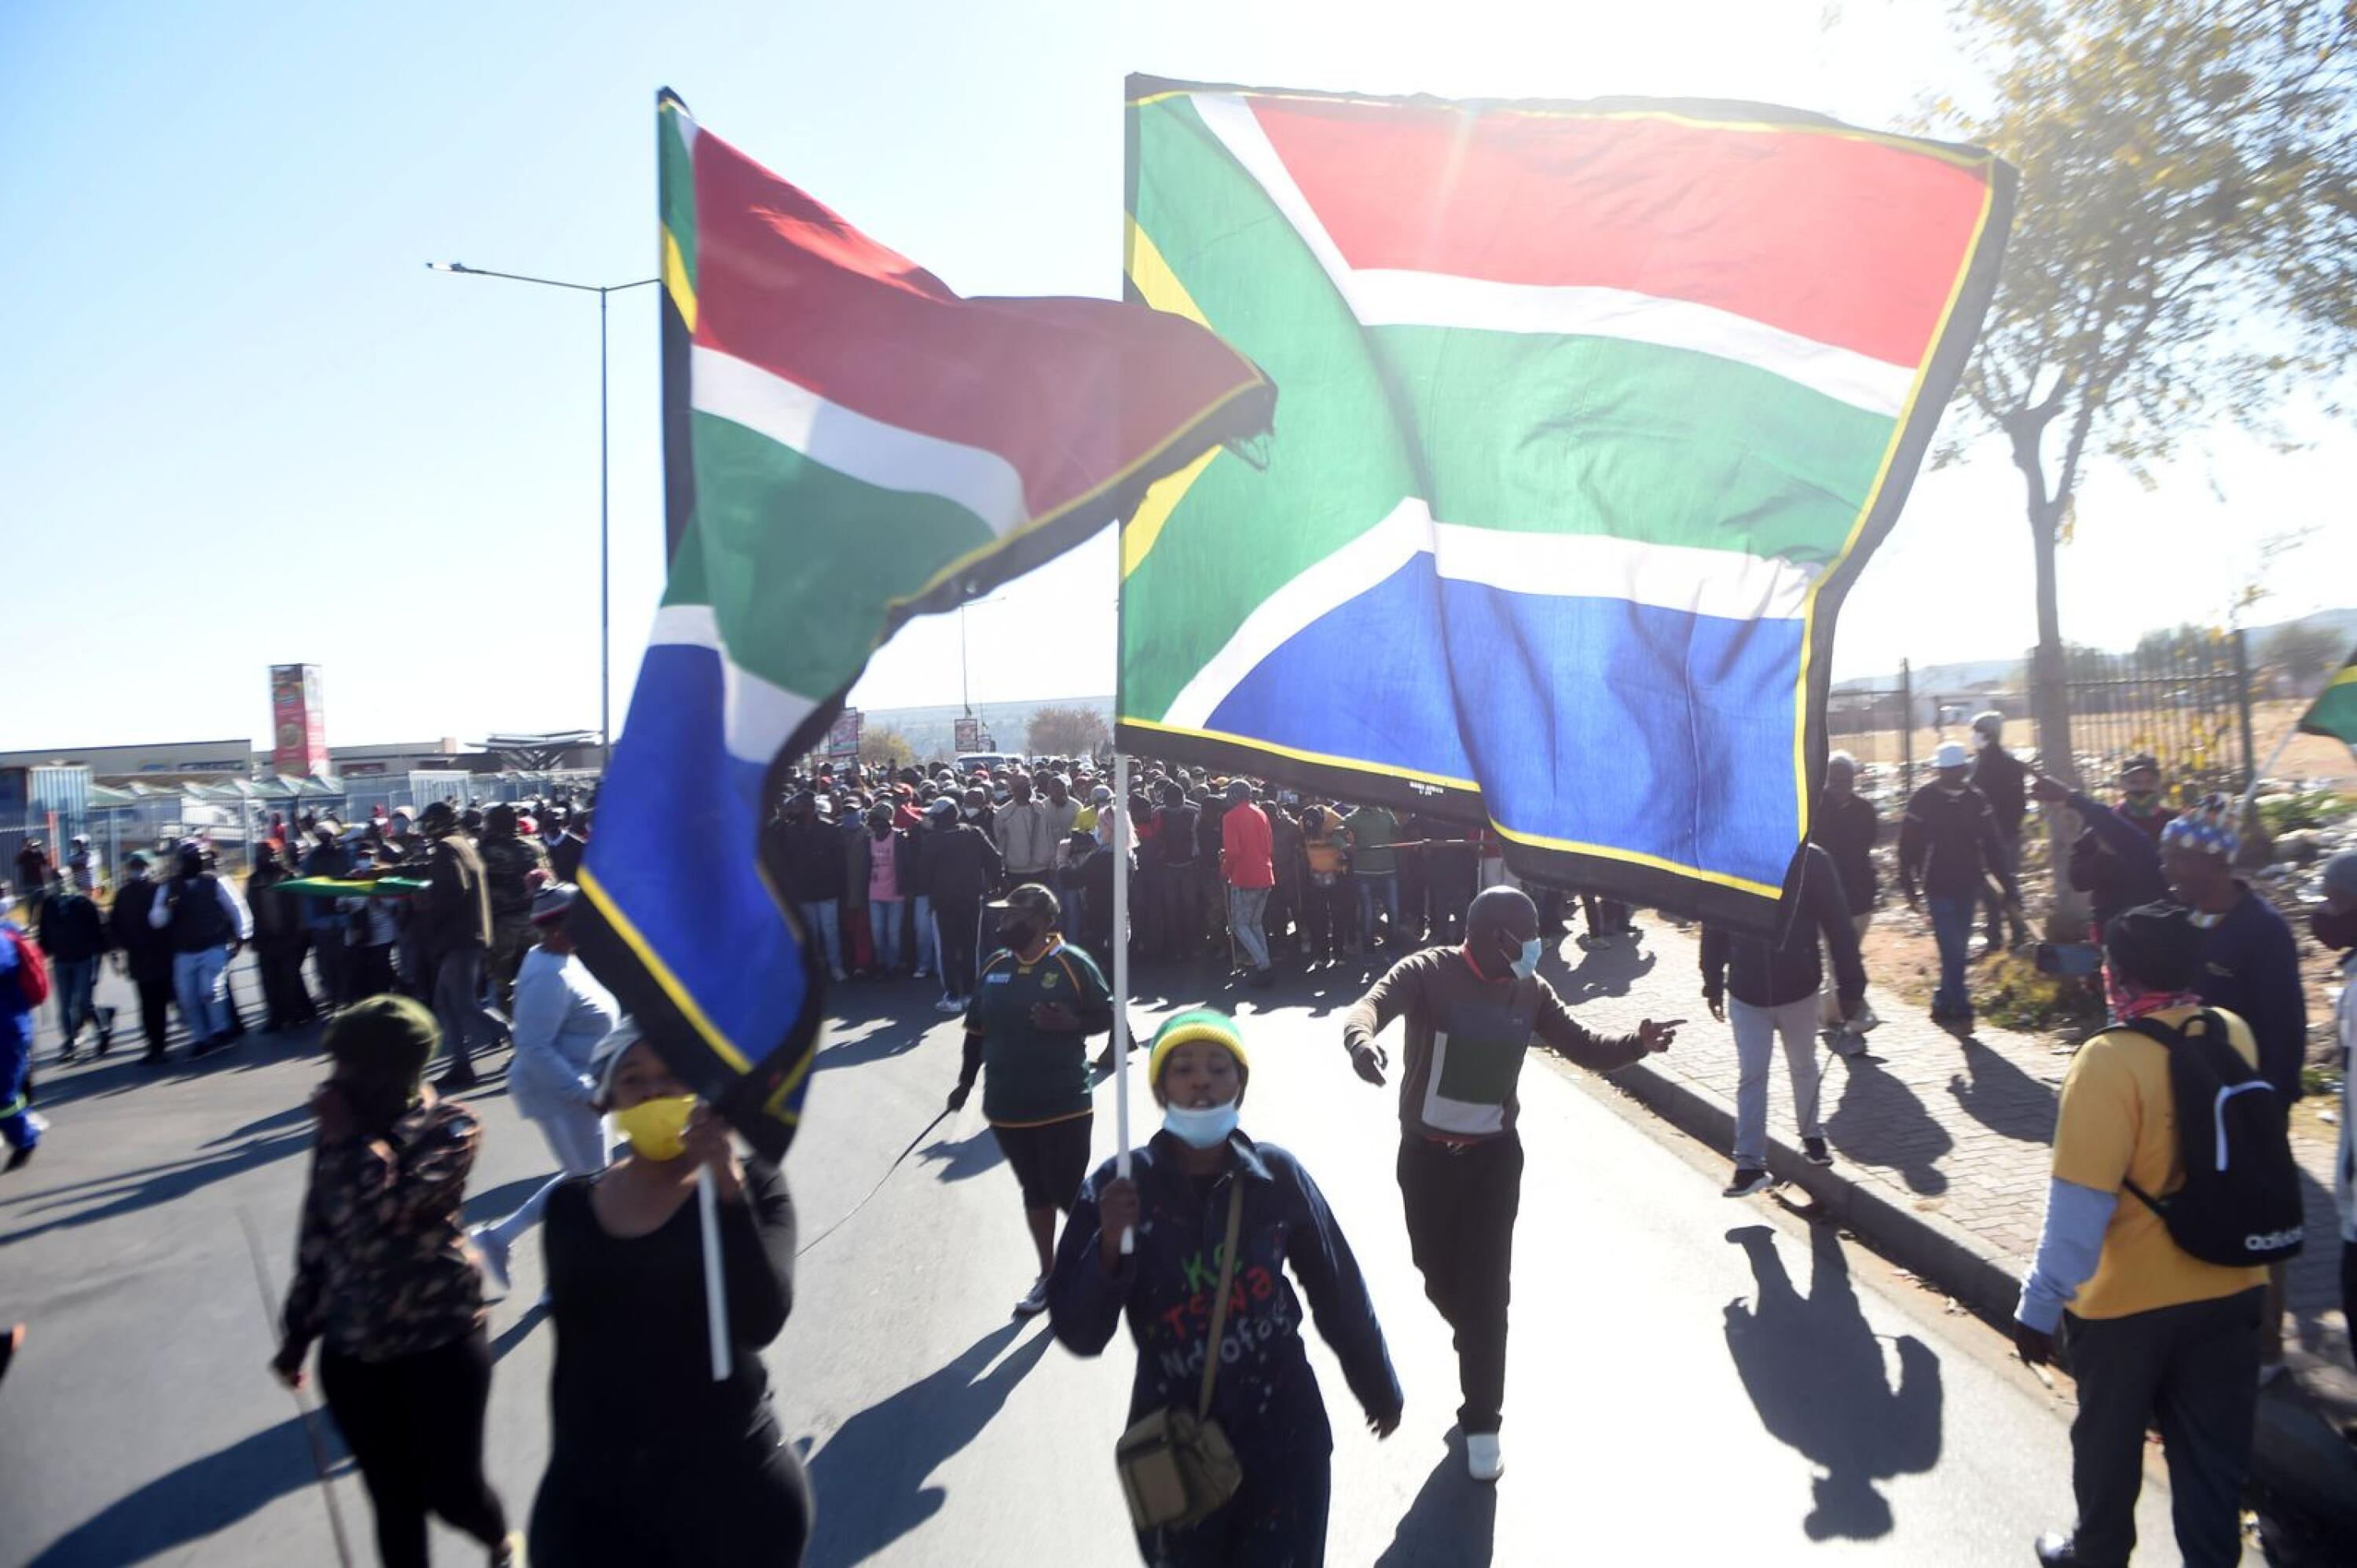 Crowds of people holding South African flag